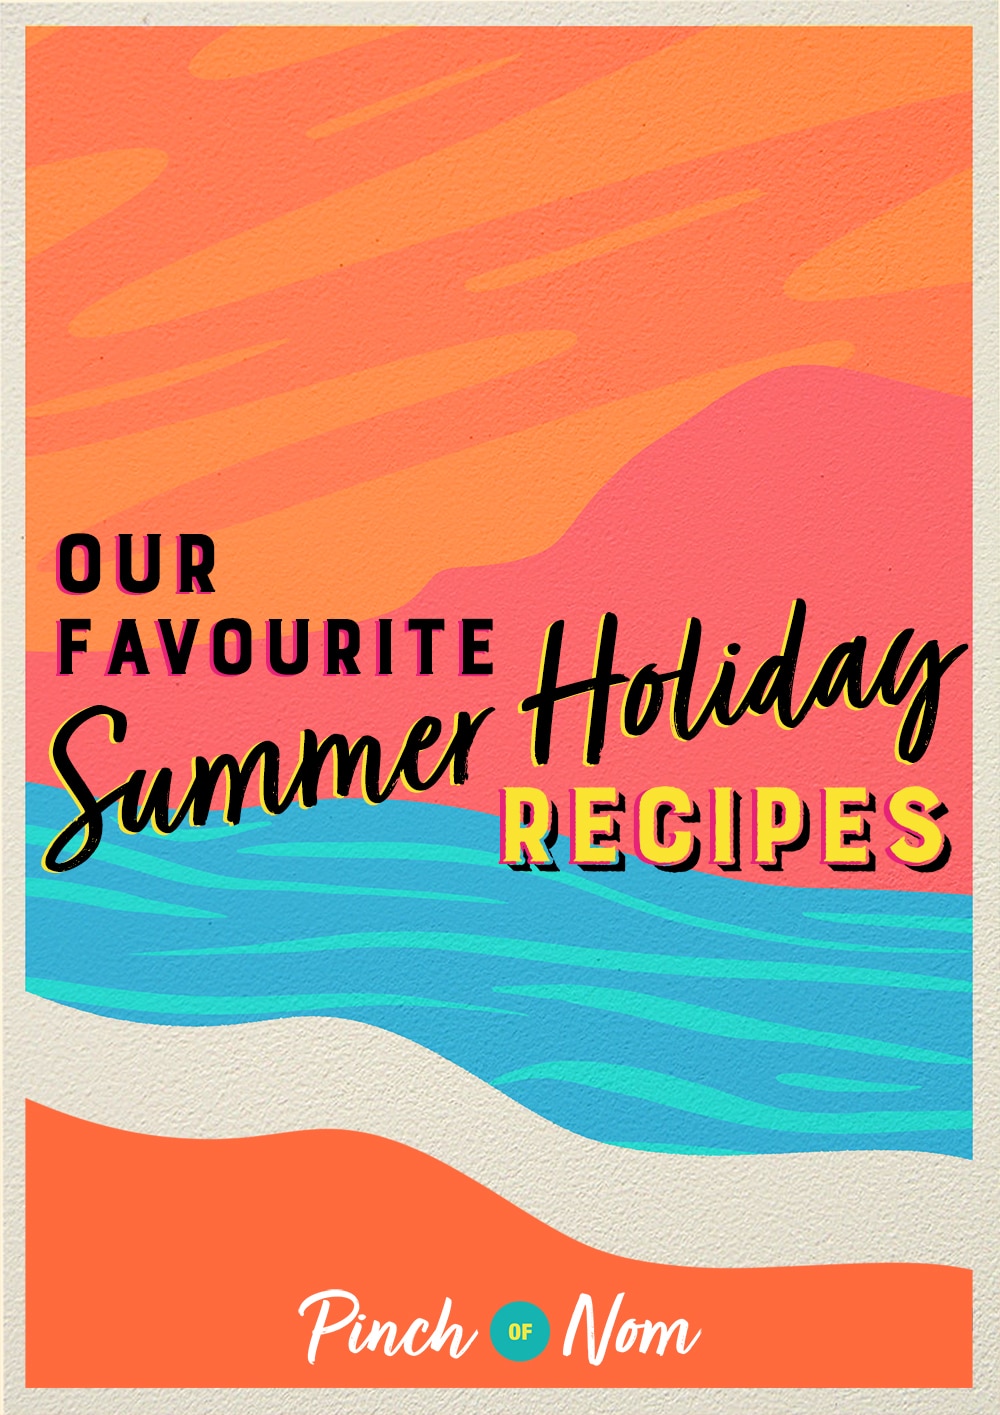 Our Favourite Summer Holiday Recipes - Pinch of Nom Slimming Recipes